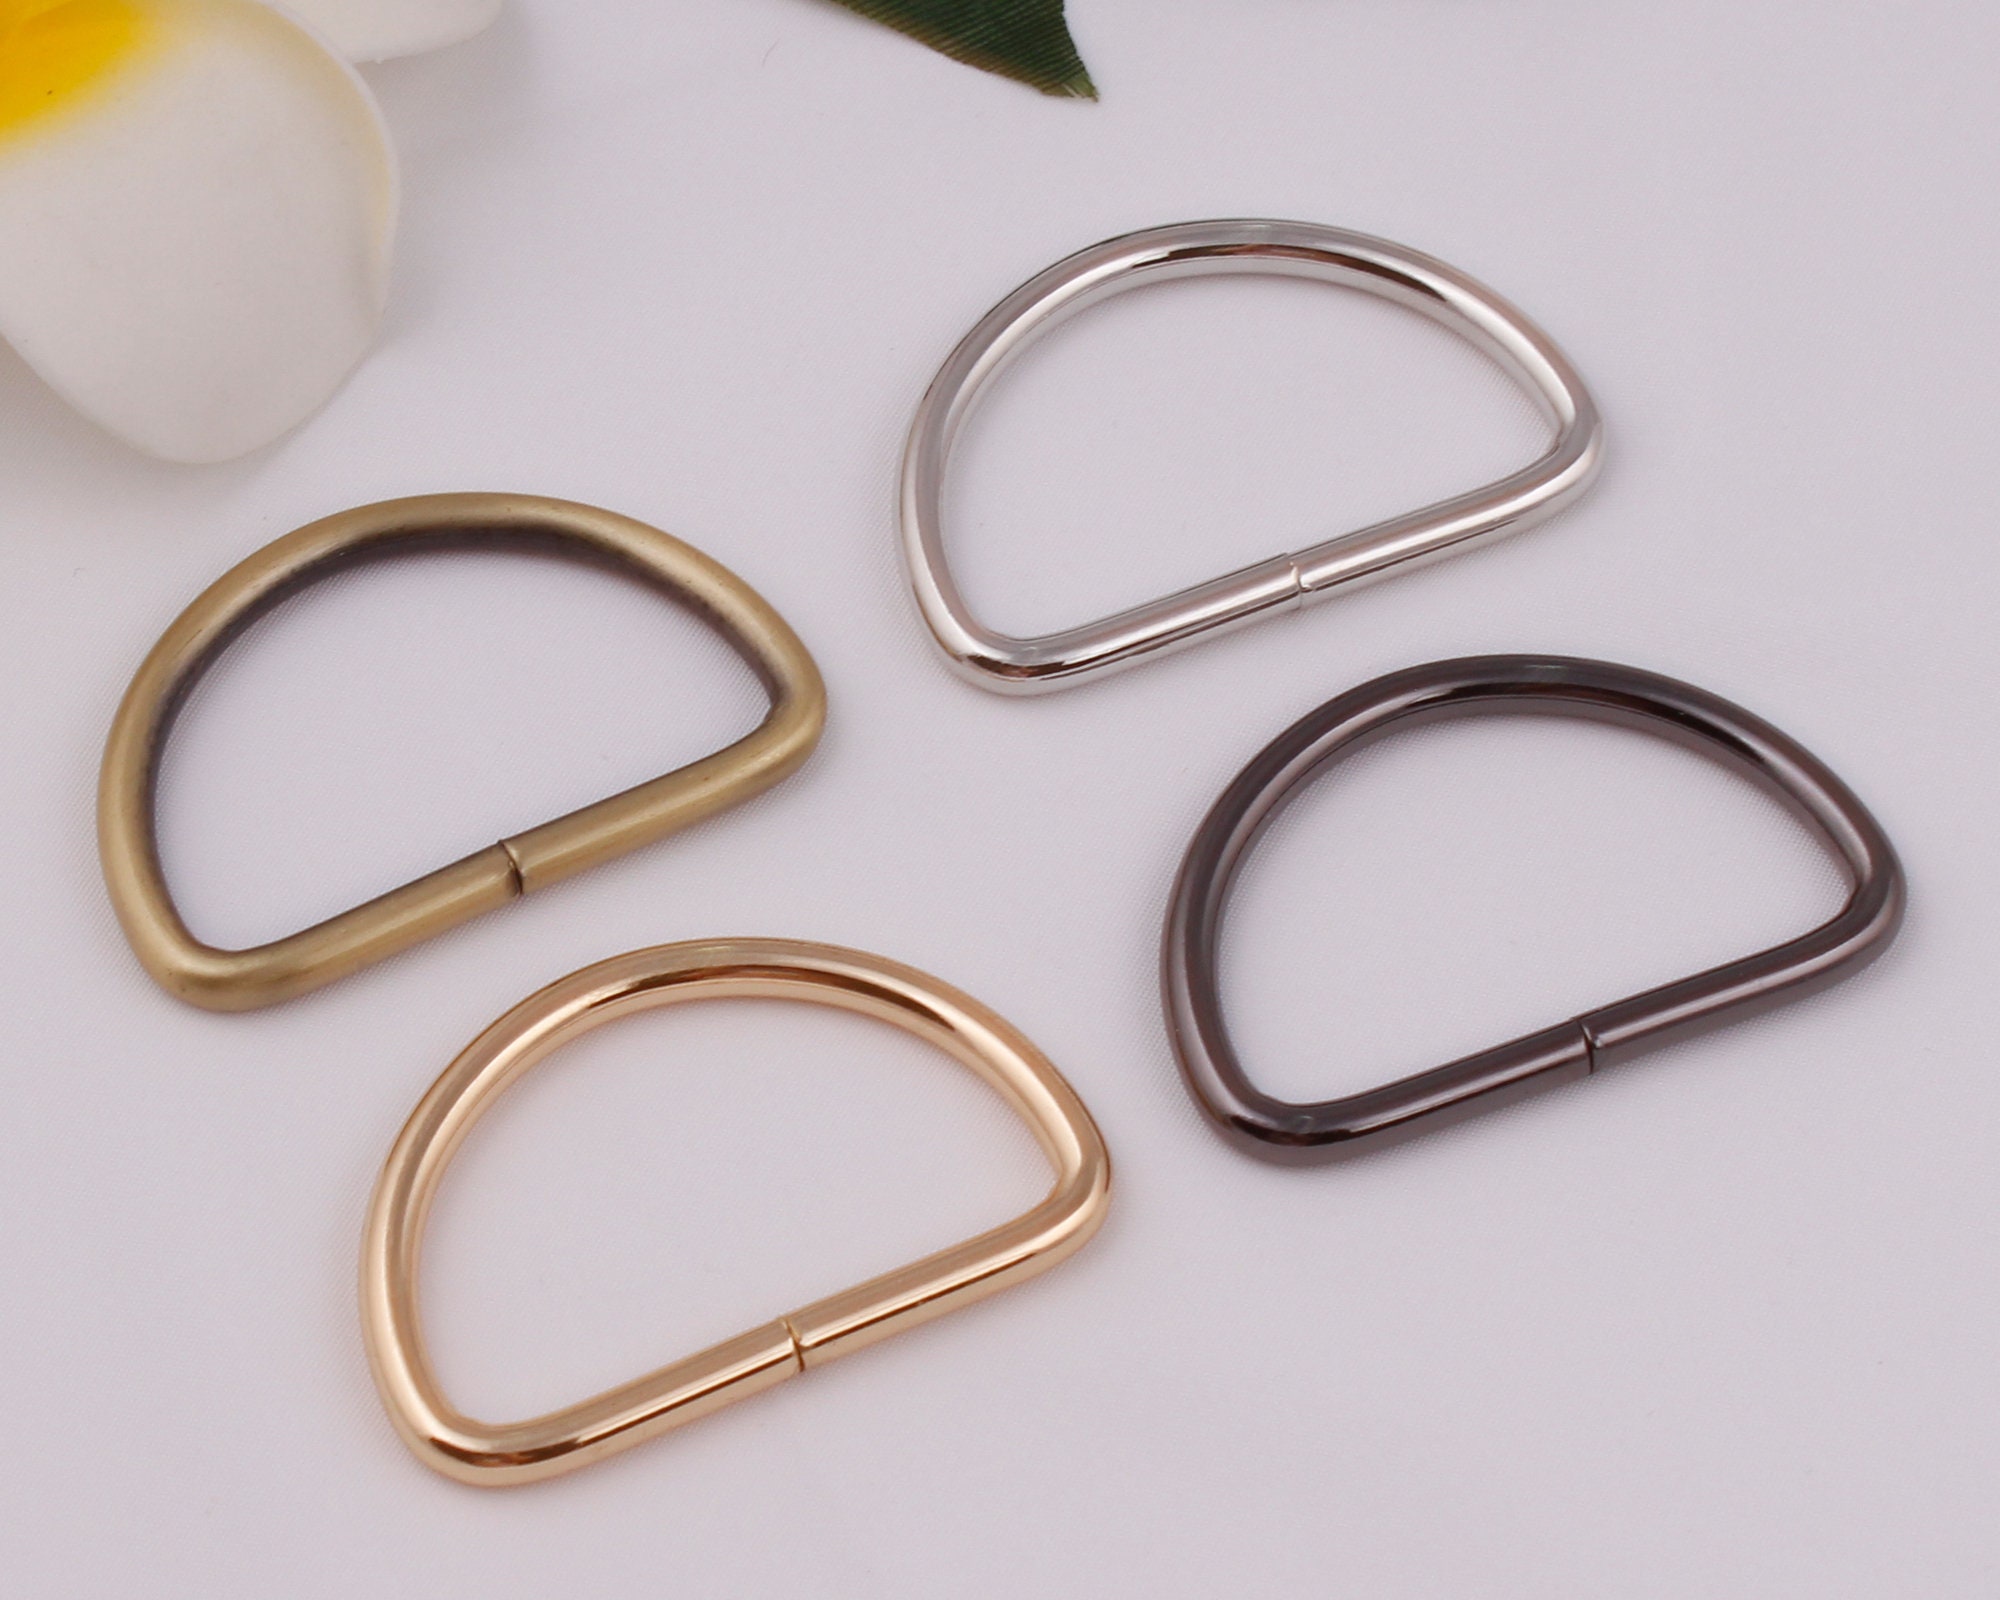 CRAFTMEMORE 6pcs D-Ring Findings Purse Belt Strap Loop Quality Finish Purse  Making D Rings SCD1